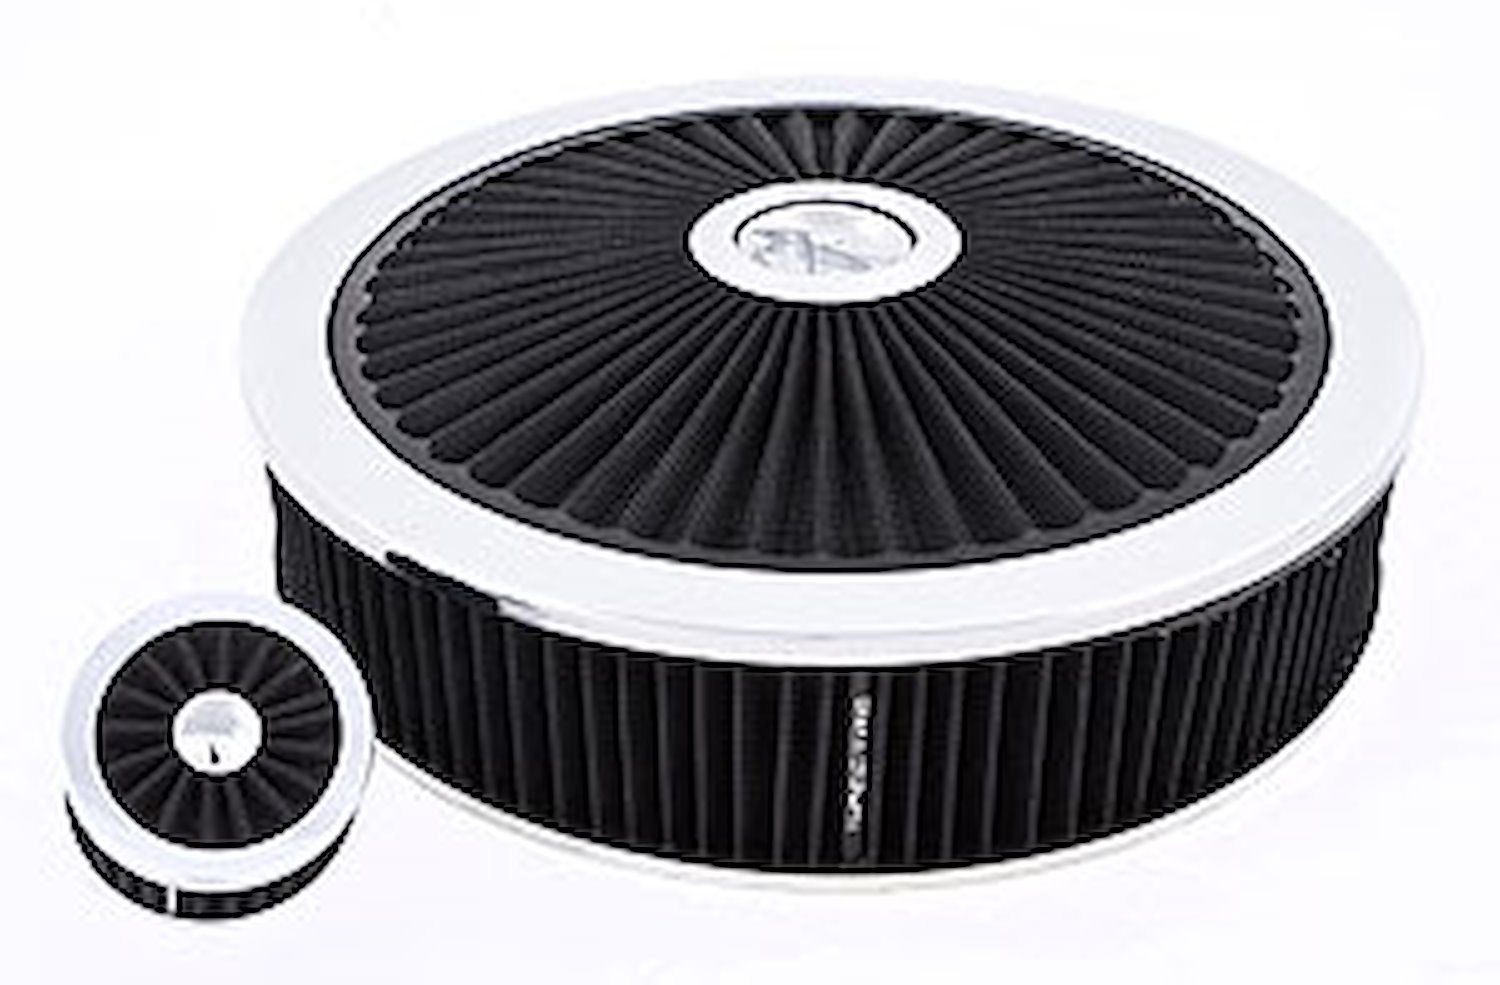 Extraflow Air Cleaner Includes: Black 14" x 3" HPR Filter